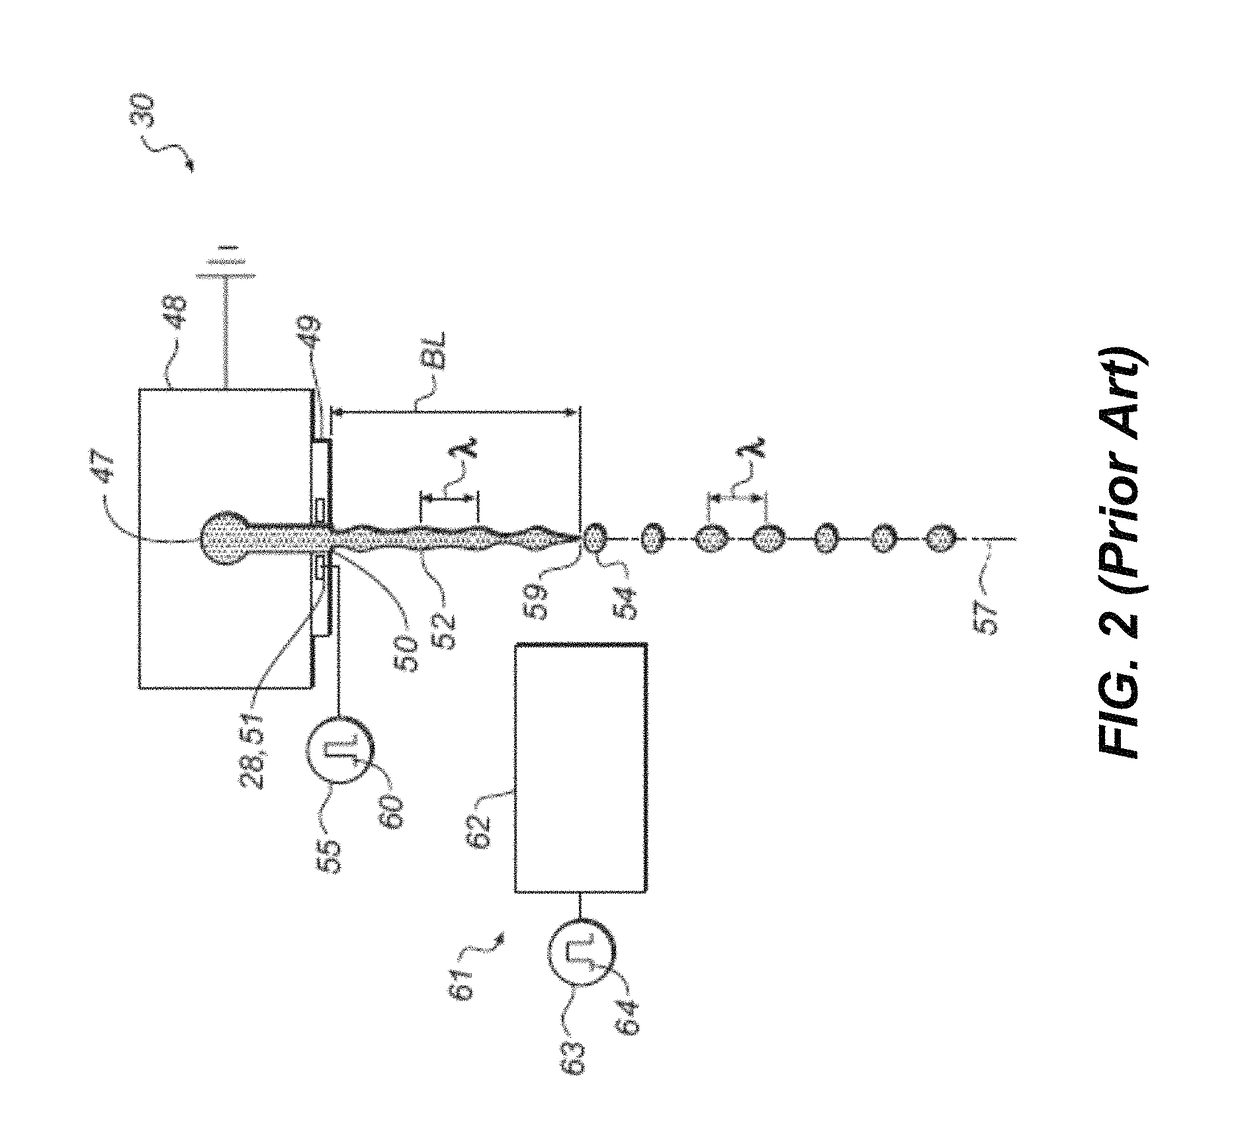 Method for fabricating a charging device